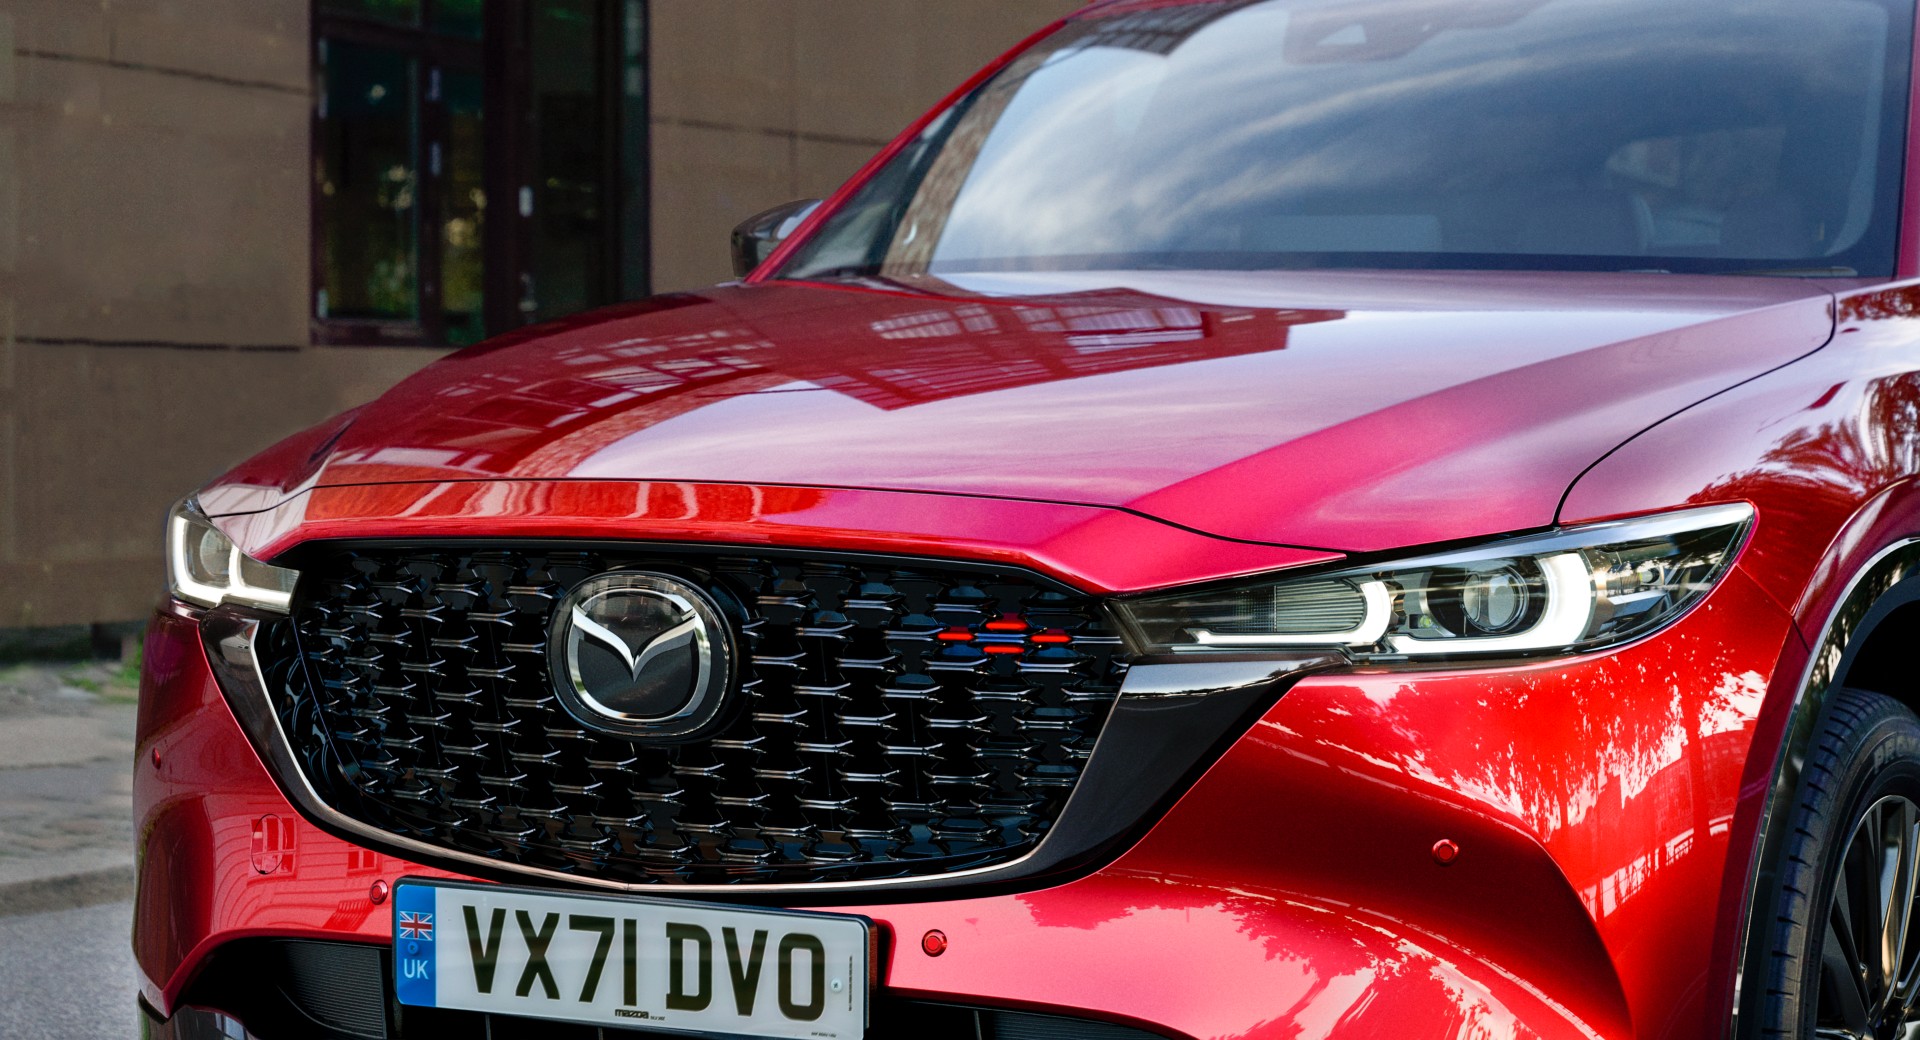 Mazda Confirms 5 New SUVs For 2022 And 2023, Including US-Only CX